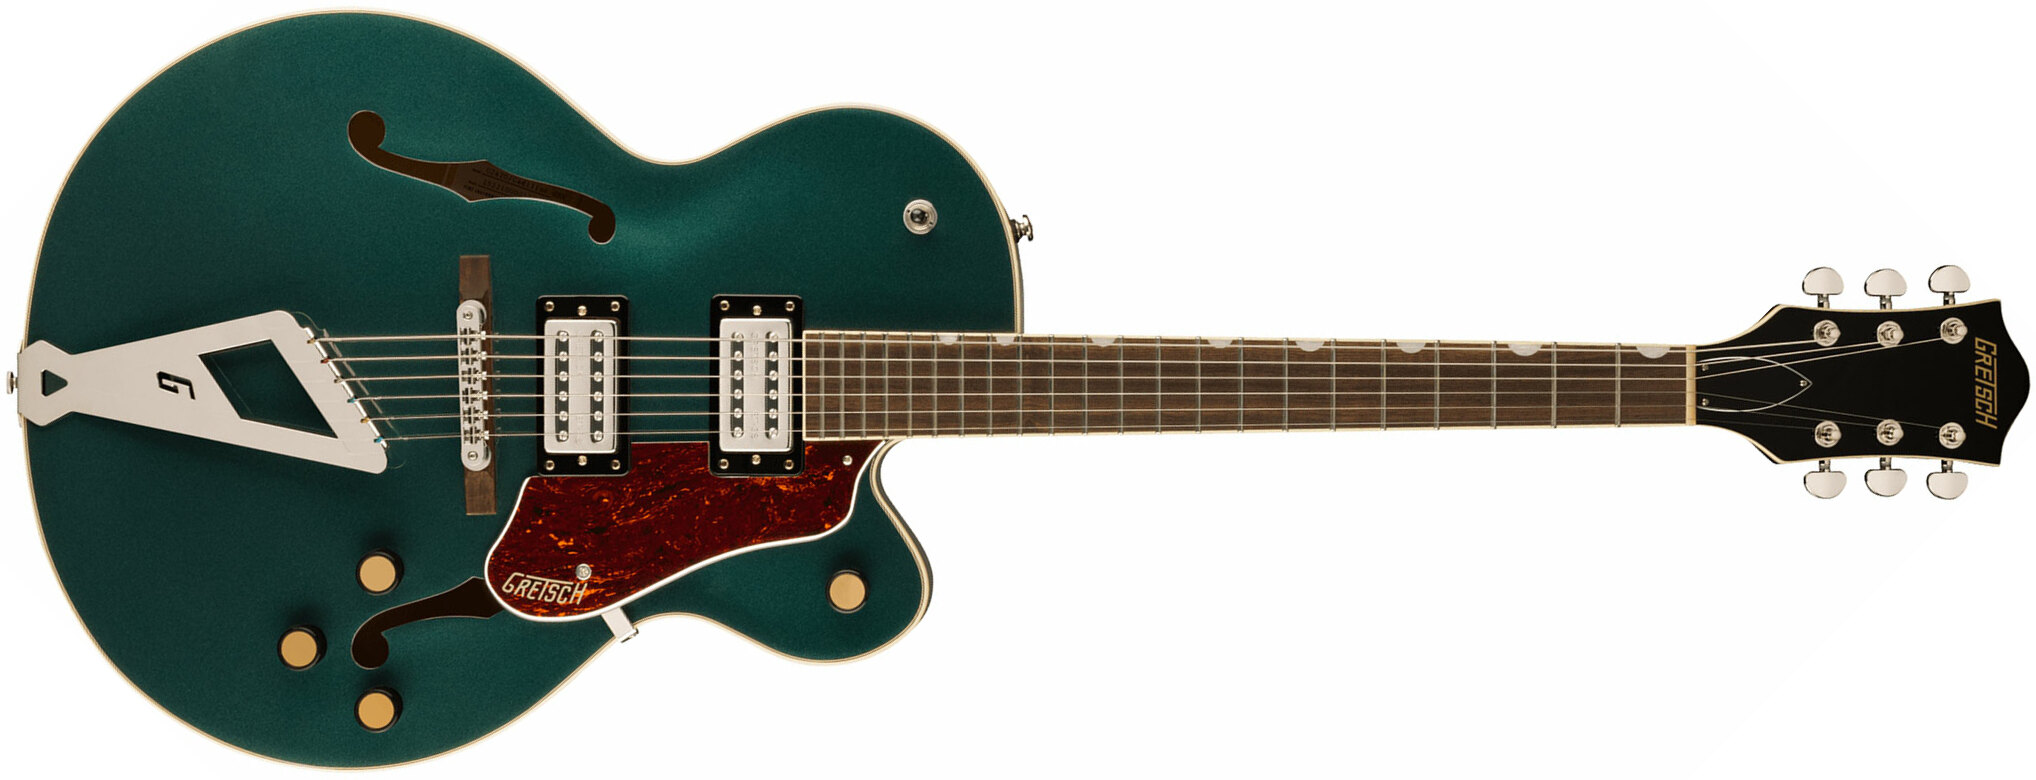 Gretsch G2420 Streamliner Hollow Body With Chromatic Ii 2h Ht Lau - Cadillac Green - Hollow-body electric guitar - Main picture